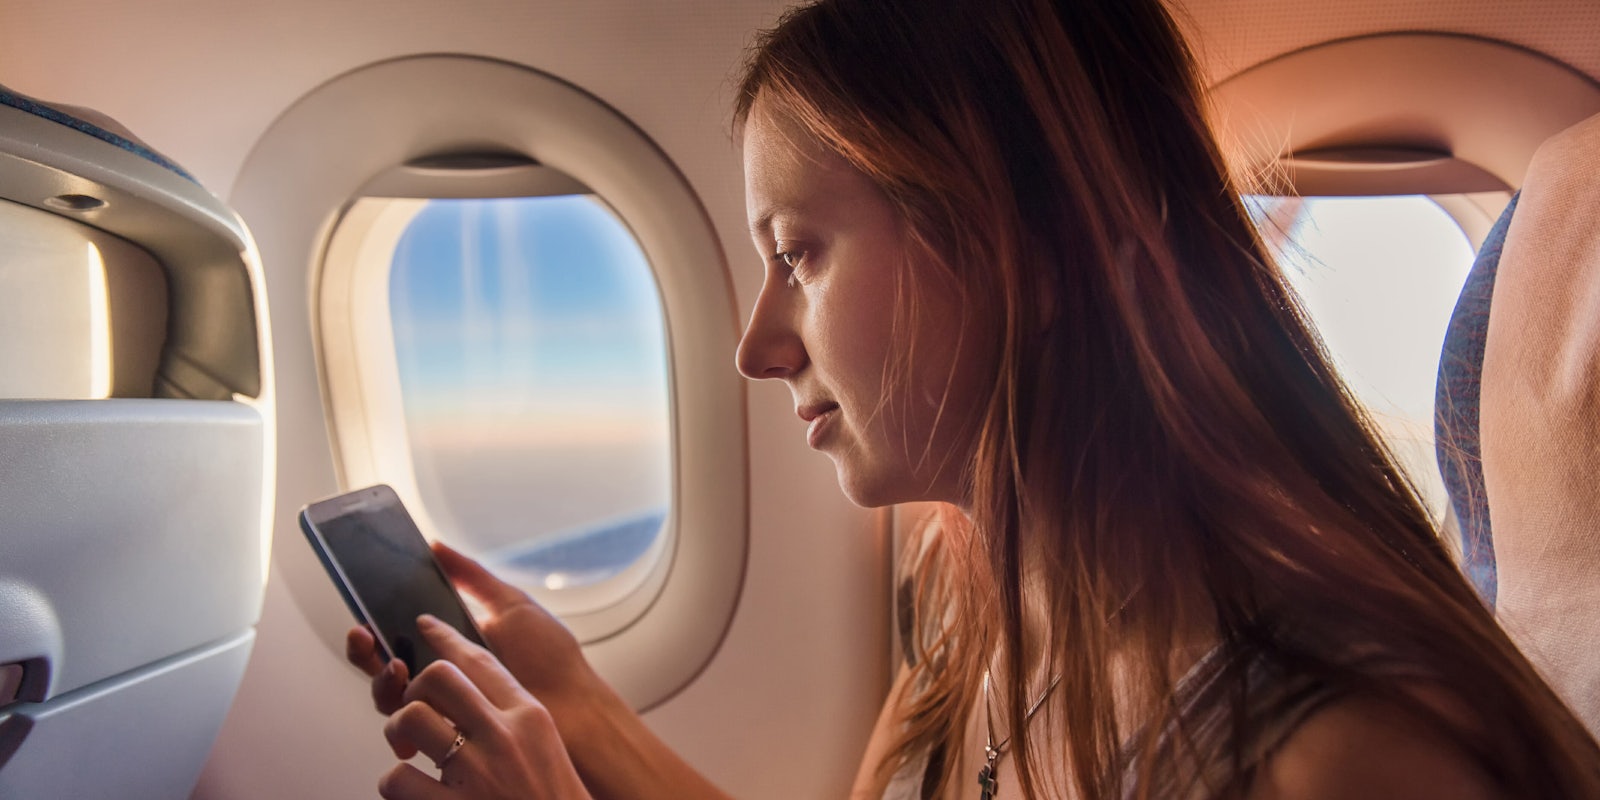 Woman Using Cellphone on a Plane